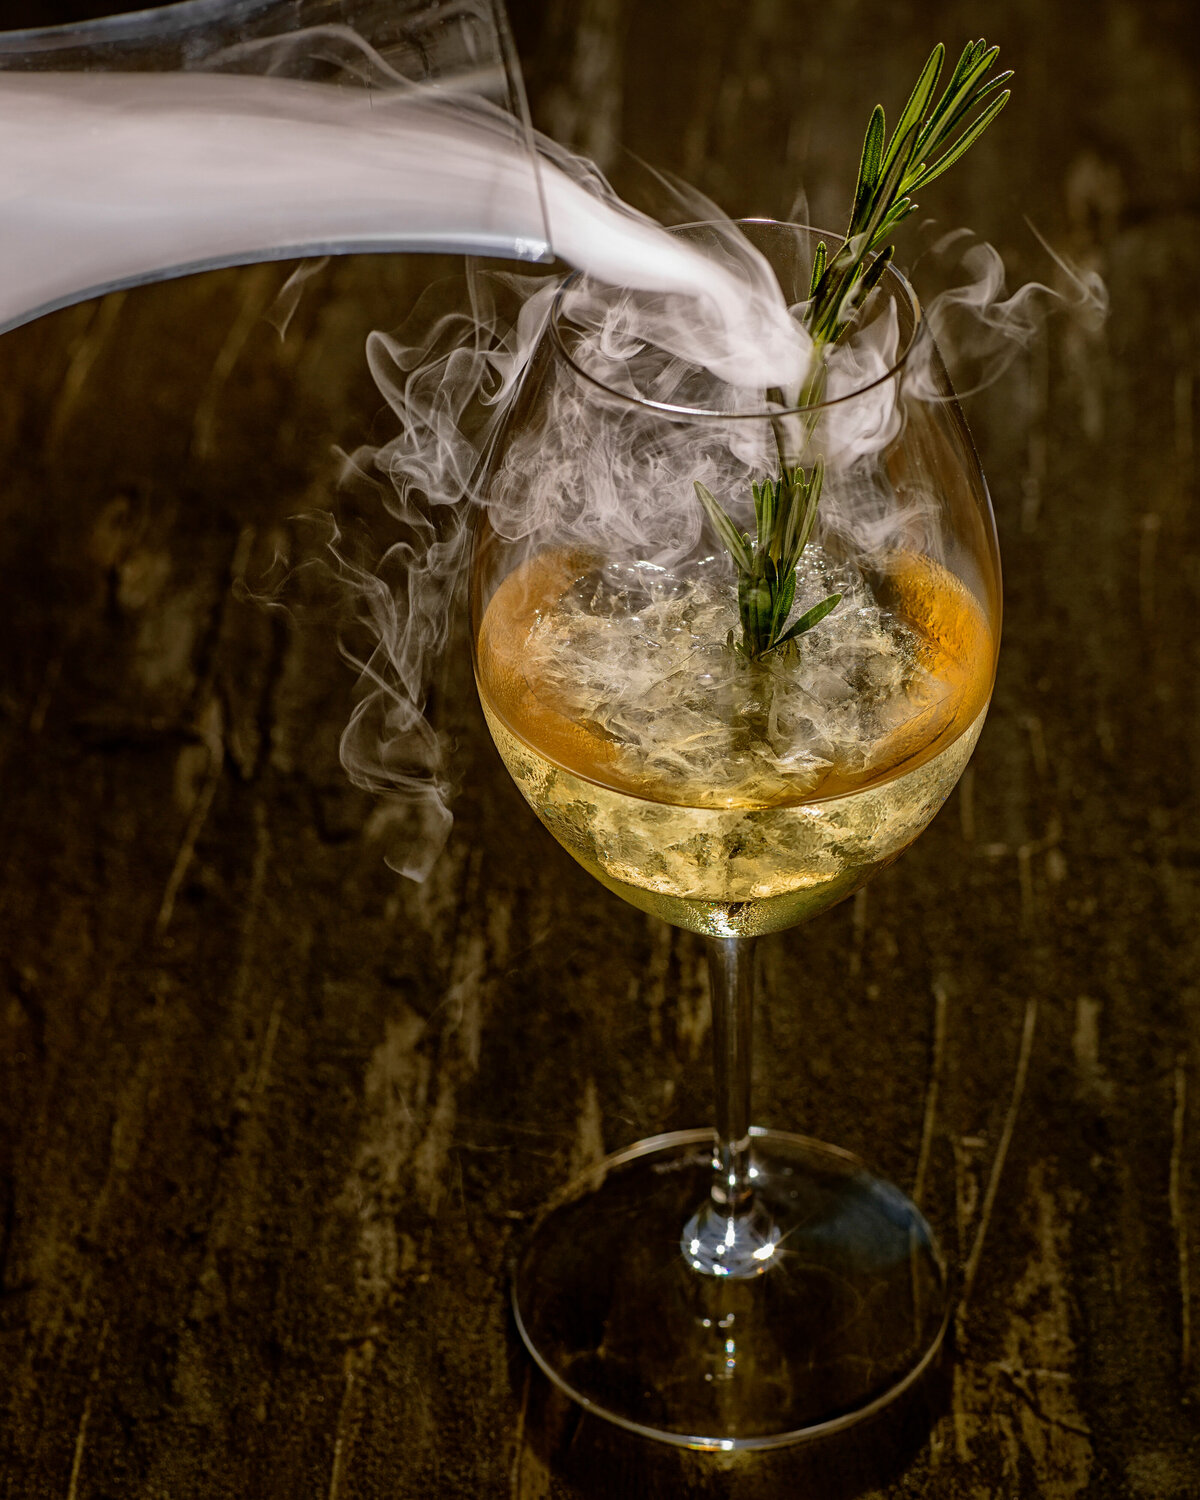 Smoke being poured into a wine glass